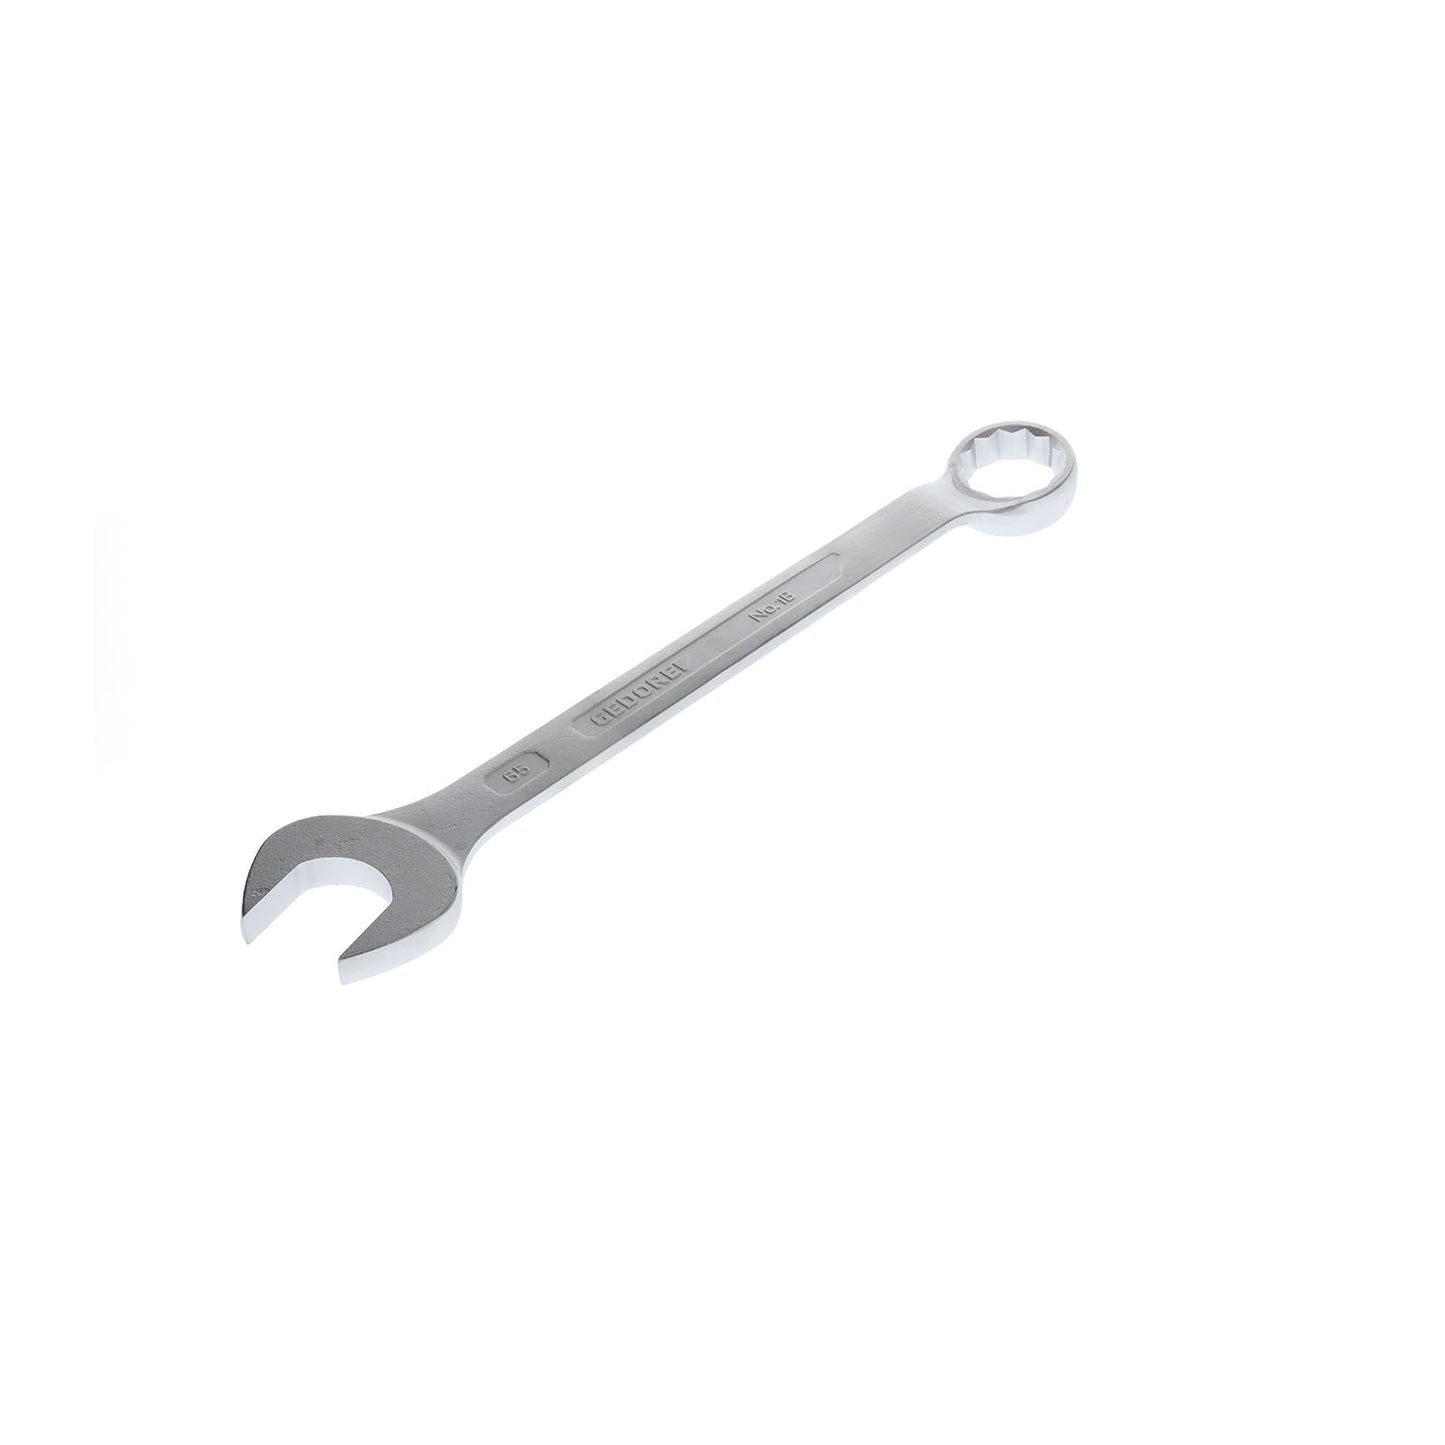 GEDORE 1 B 65 - Offset Combination Wrench, 65mm (6004660)